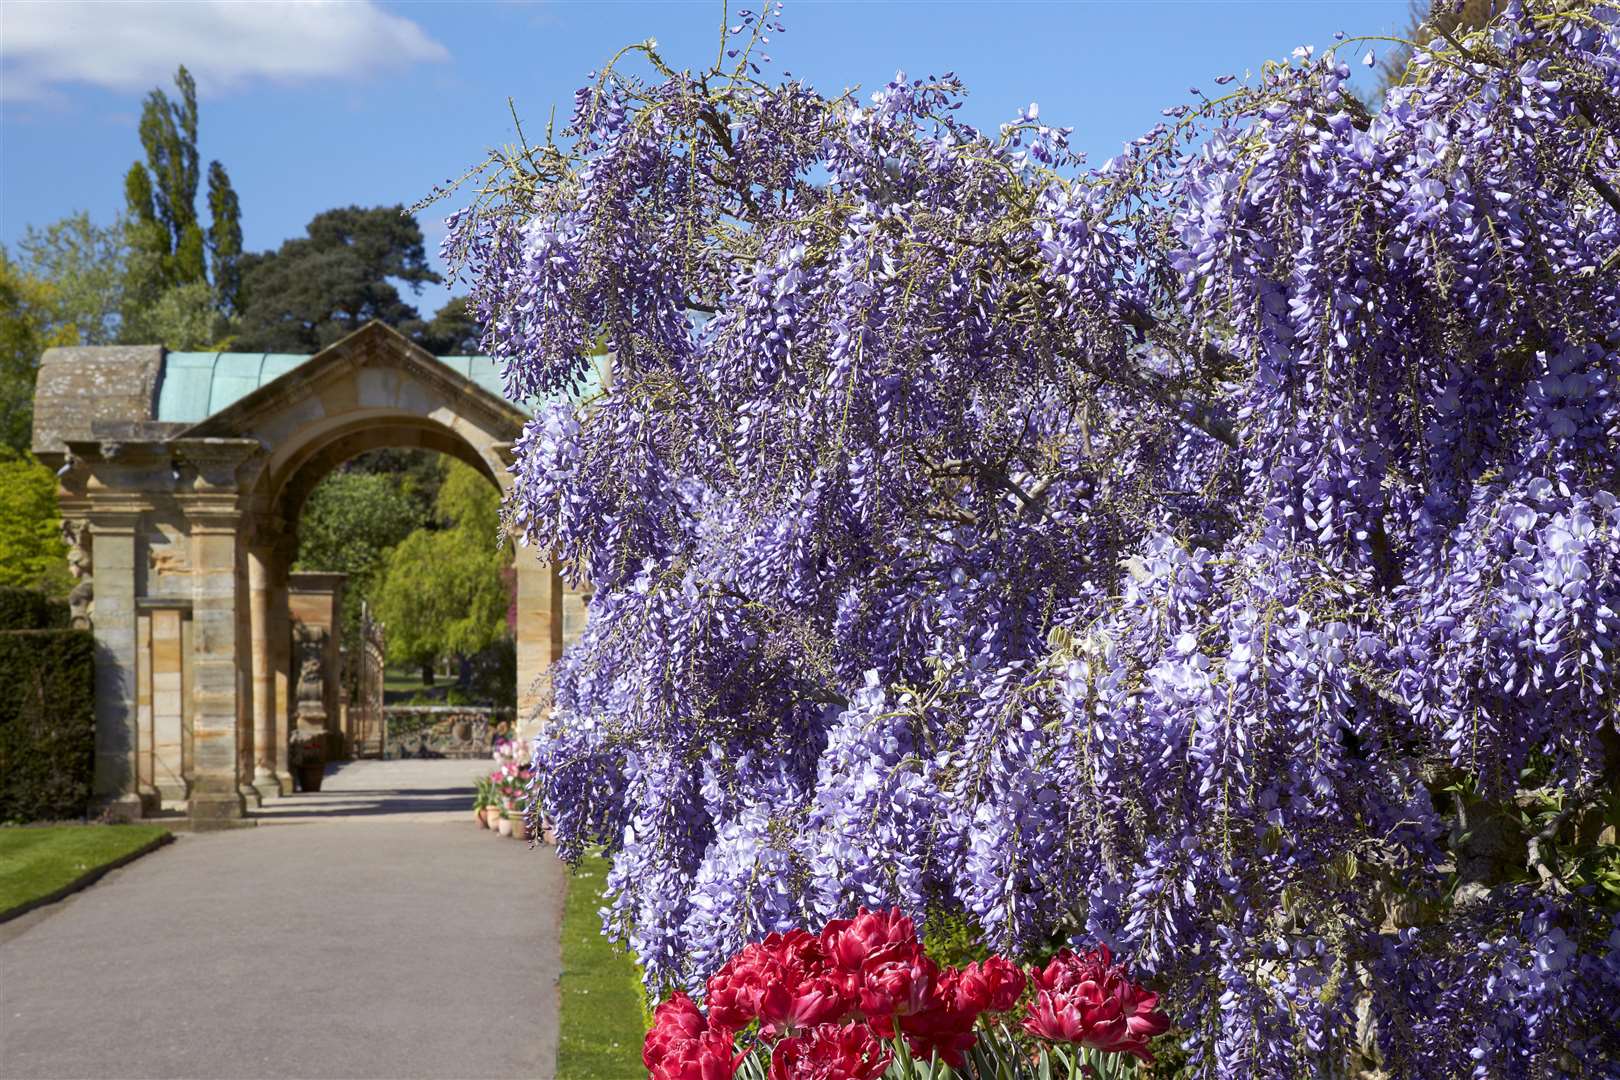 Wisteria on the Pompeiian Wall at Hever